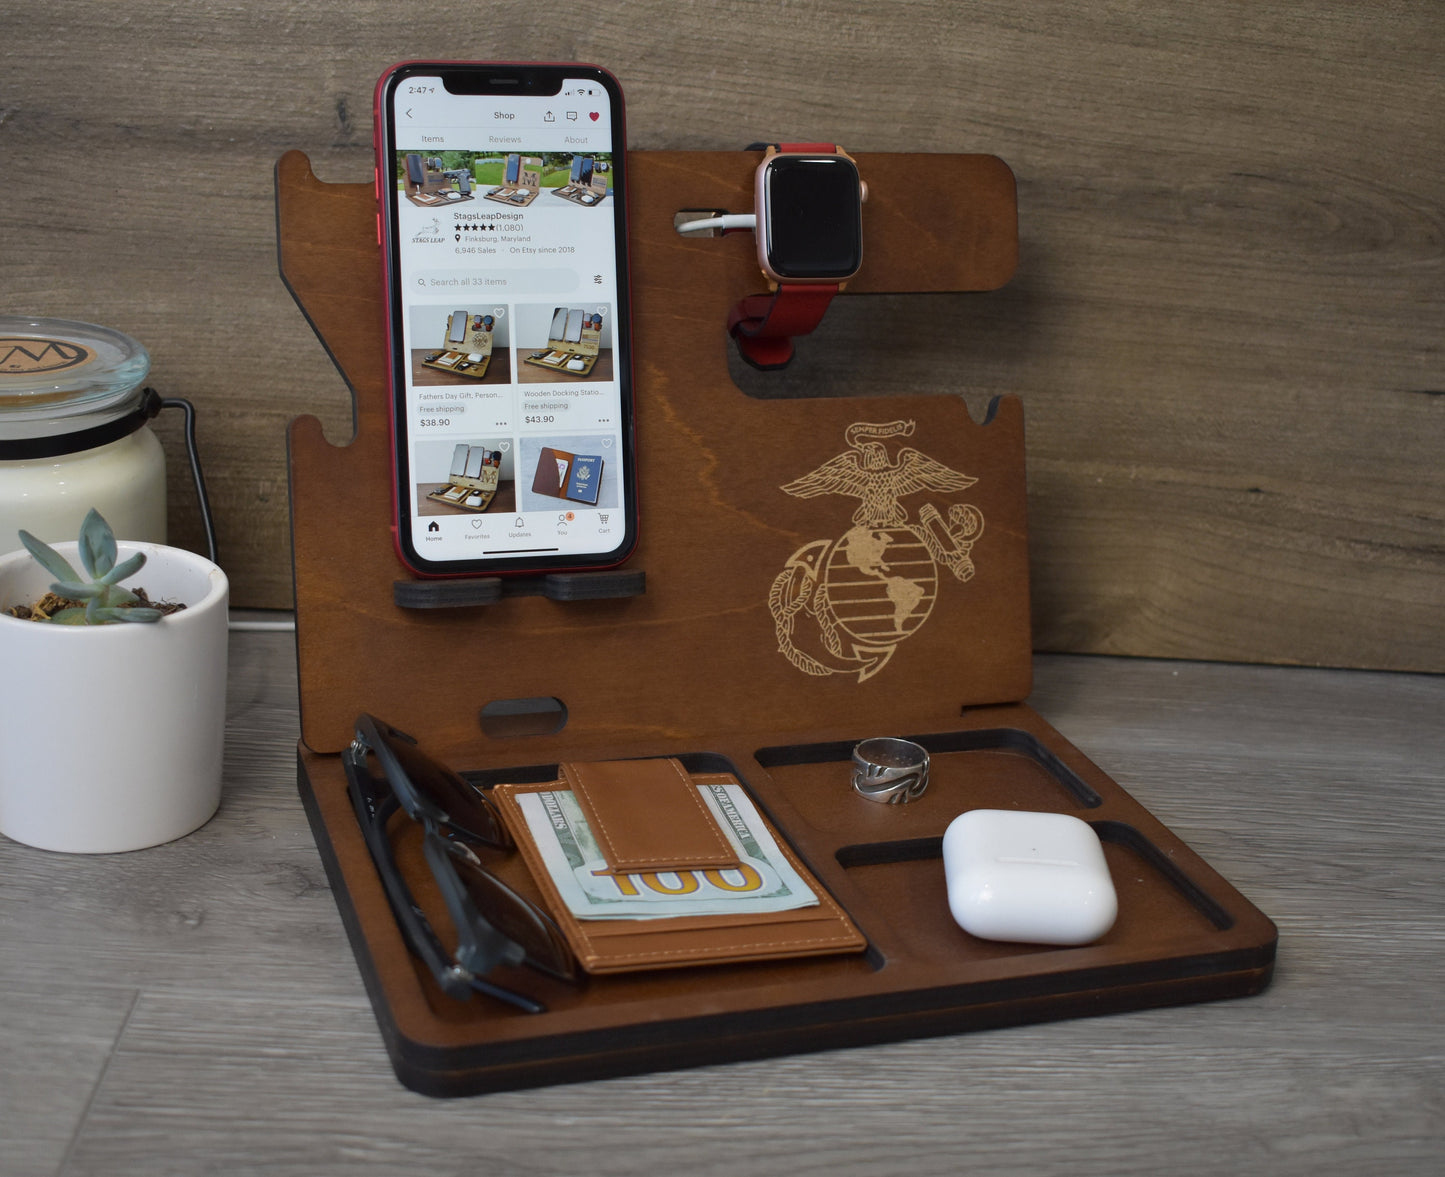 Personalized Docking Station for Moms